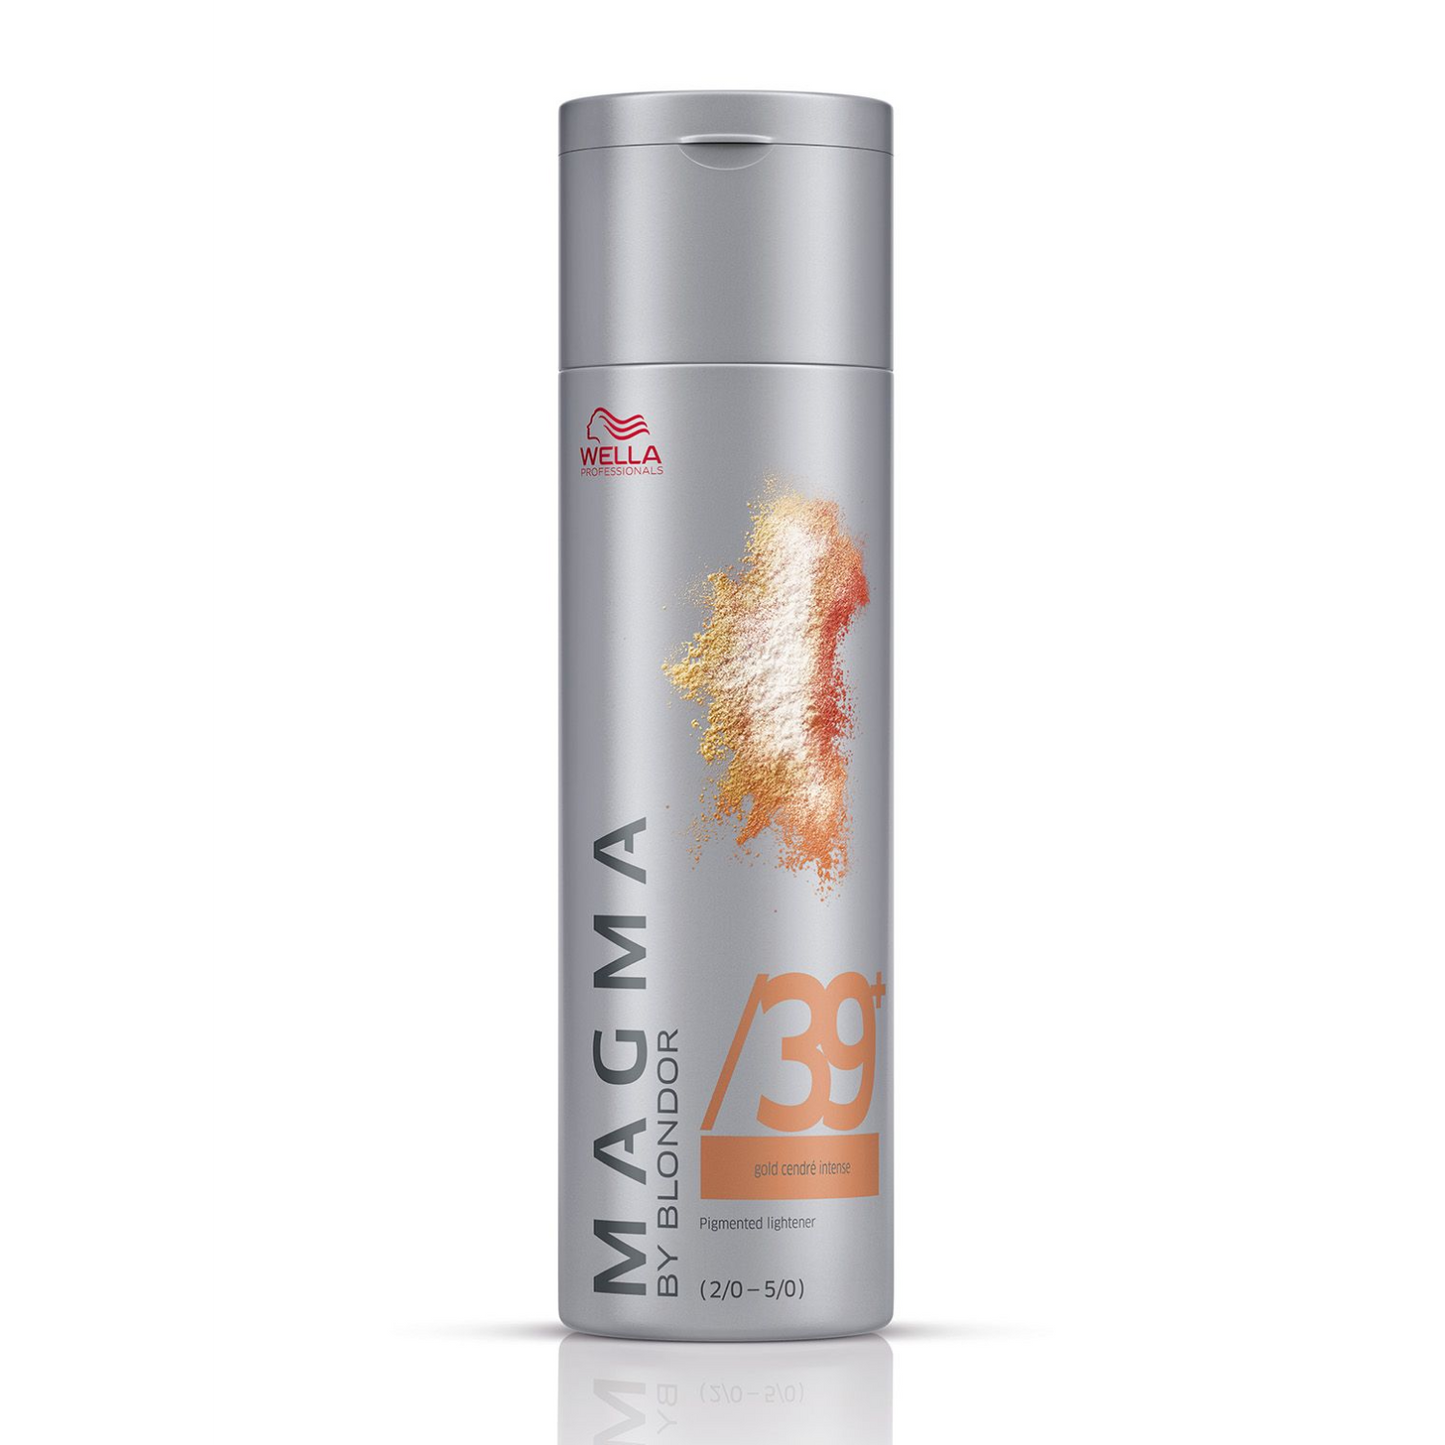 Wella Professionals Magma by Blondor Colour Lift 120g - /39 Light Ash Gold